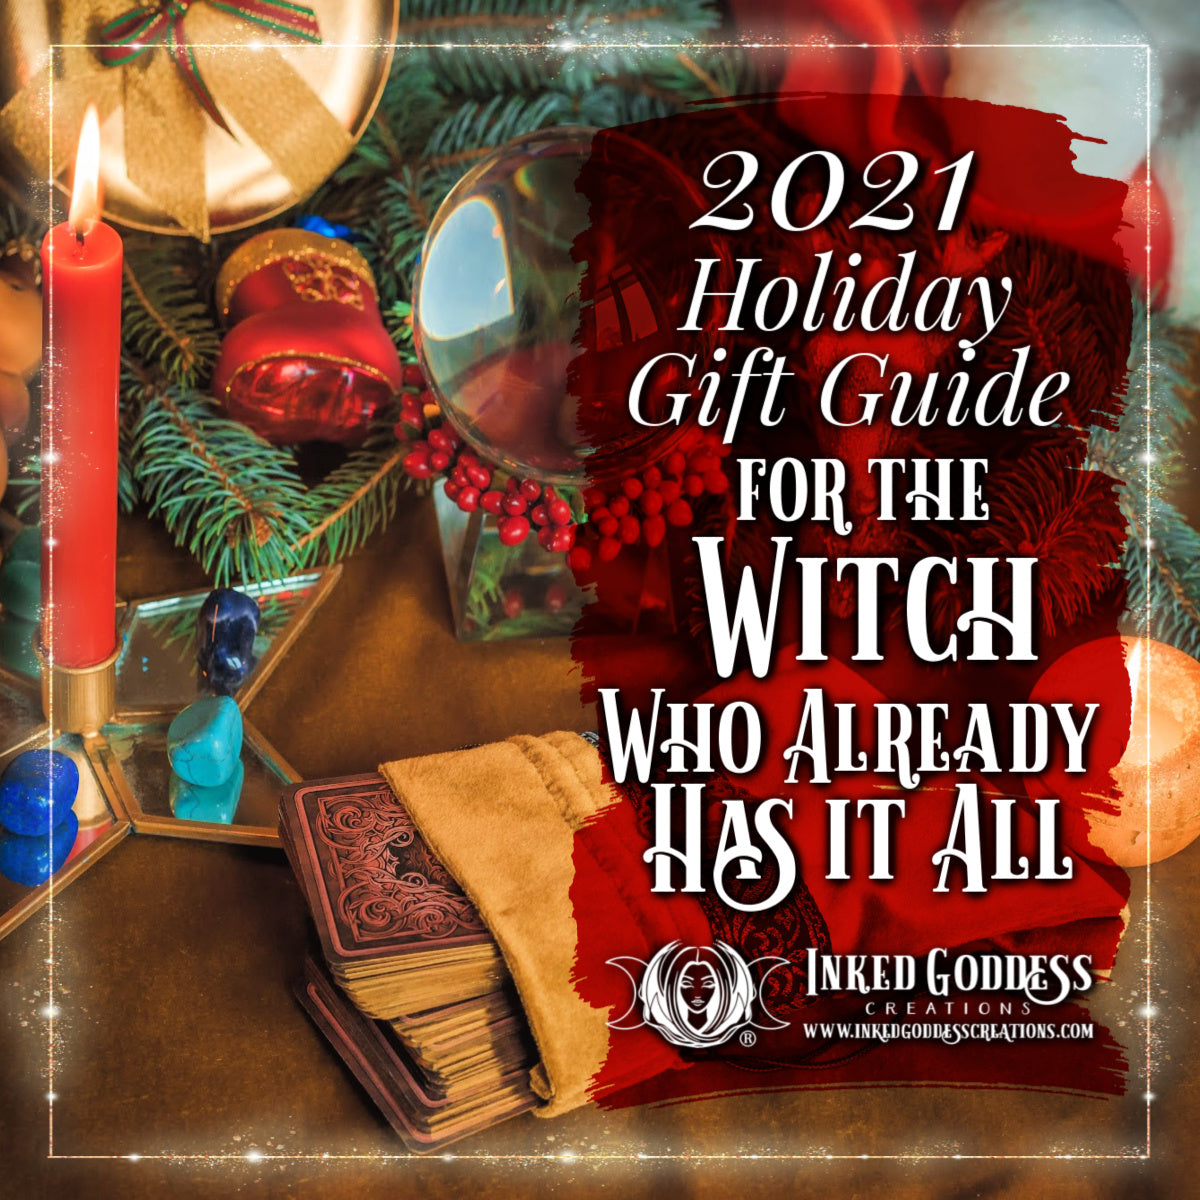 2021 Holiday Gift Guide for the Witch Who Already Has it All